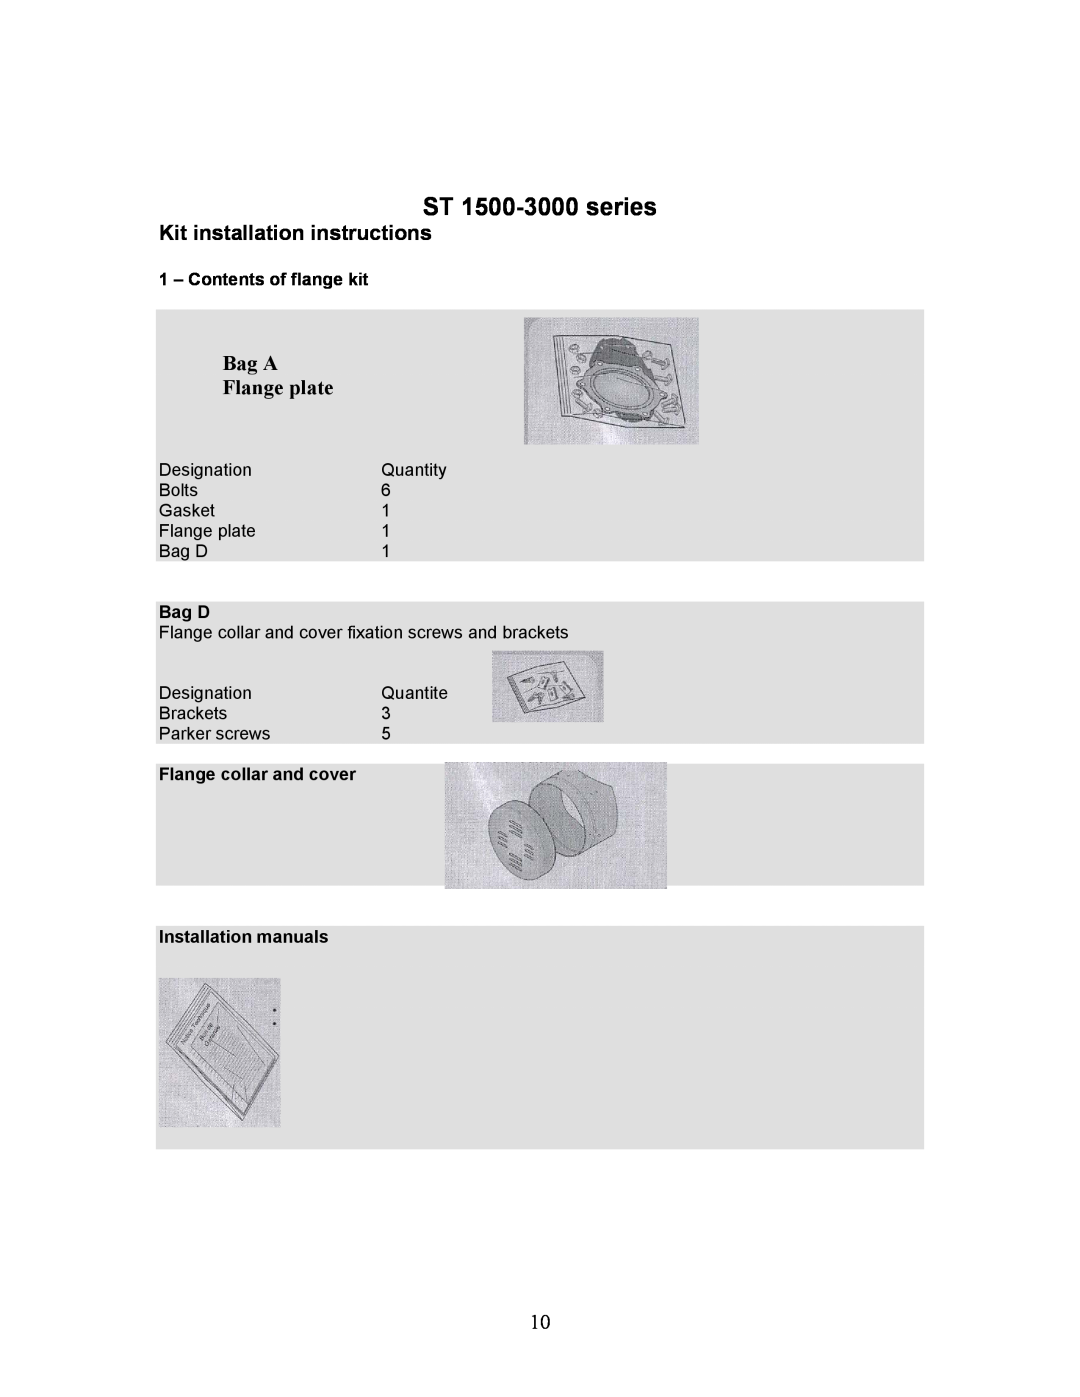 A.O. Smith ST 3000 Bag A Flange plate, ST 1500-3000series, Kit installation instructions 